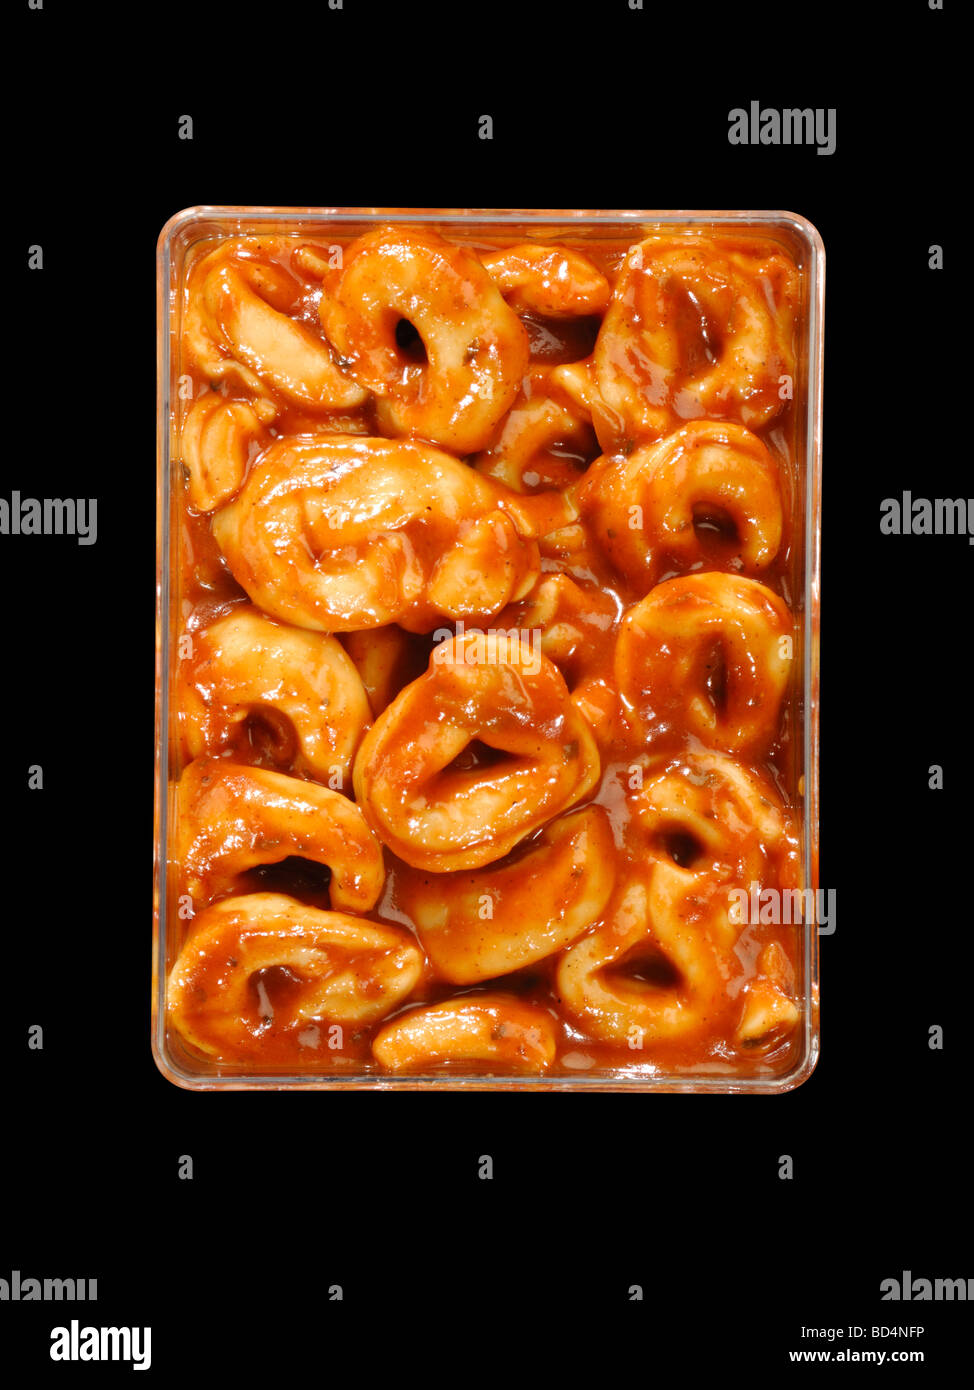 A plastic container with military food rations, cheese tortellini pasta Stock Photo